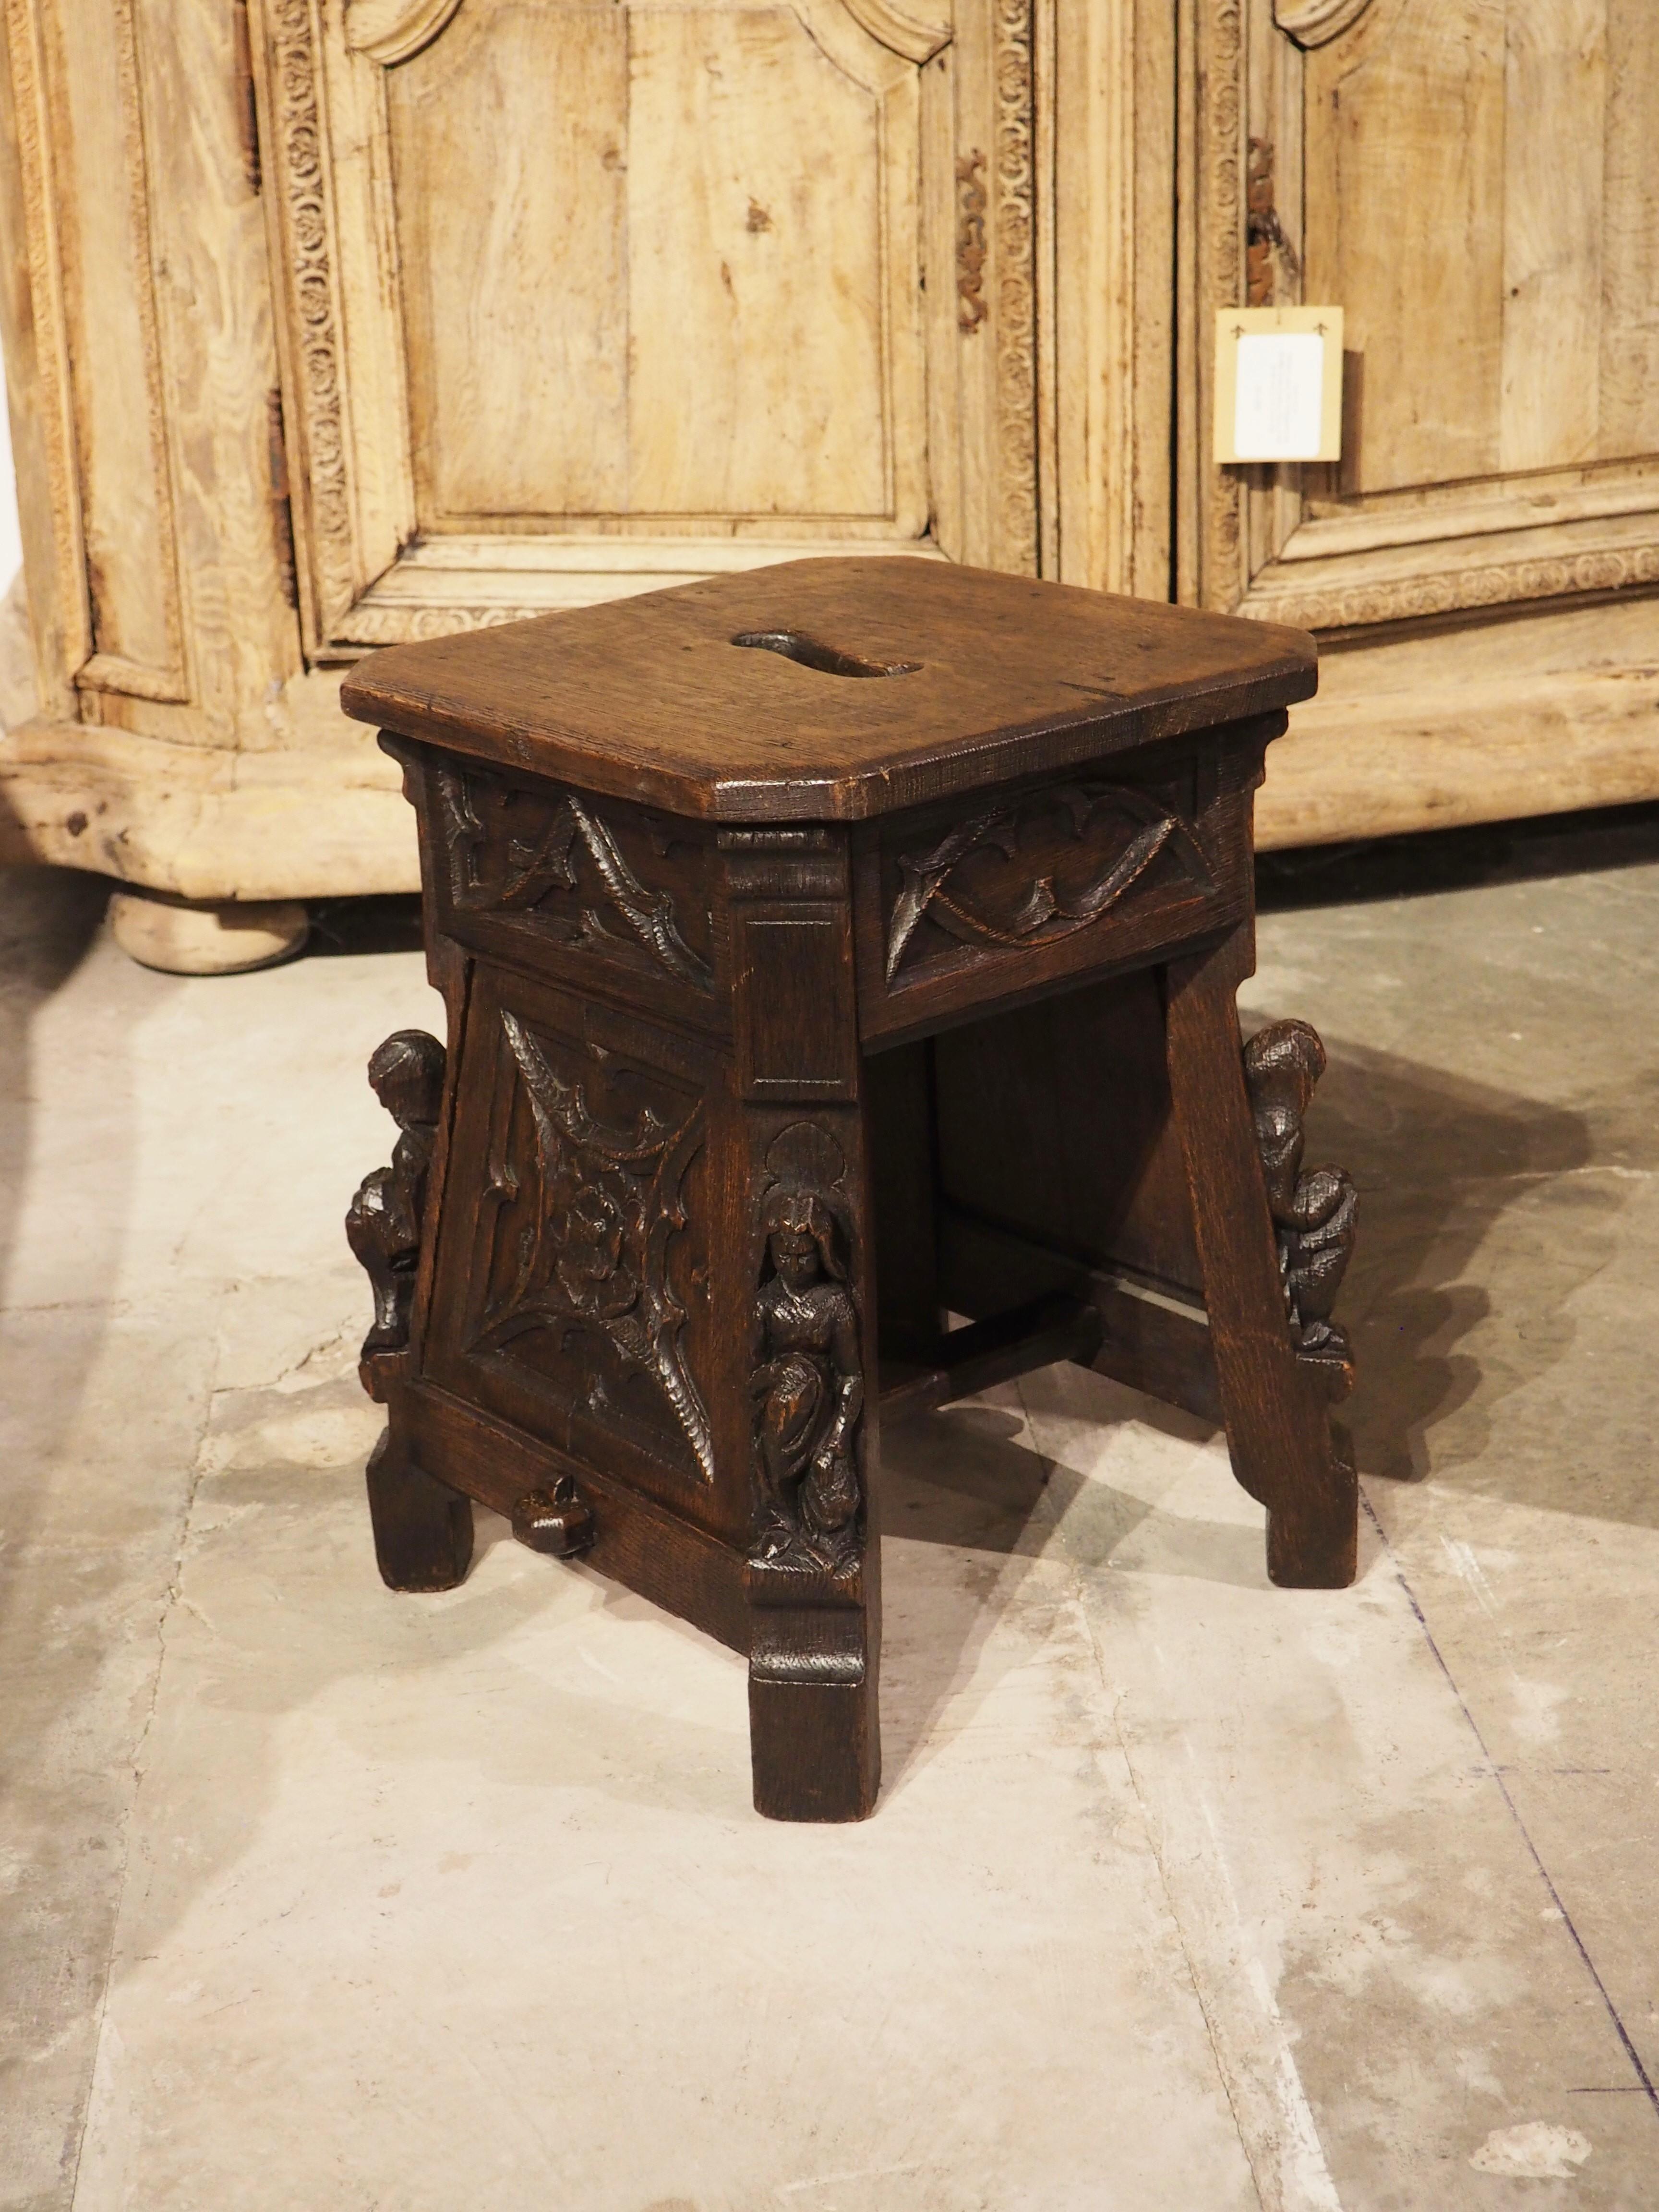 Hand-carved in France in the 1800’s, this oak tabouret stool was sculpted by an immensely talented menuisier in the Gothic style. A rectangular seat with canted corners has an elongated elliptic cutout in the center. Below each canted corner is a